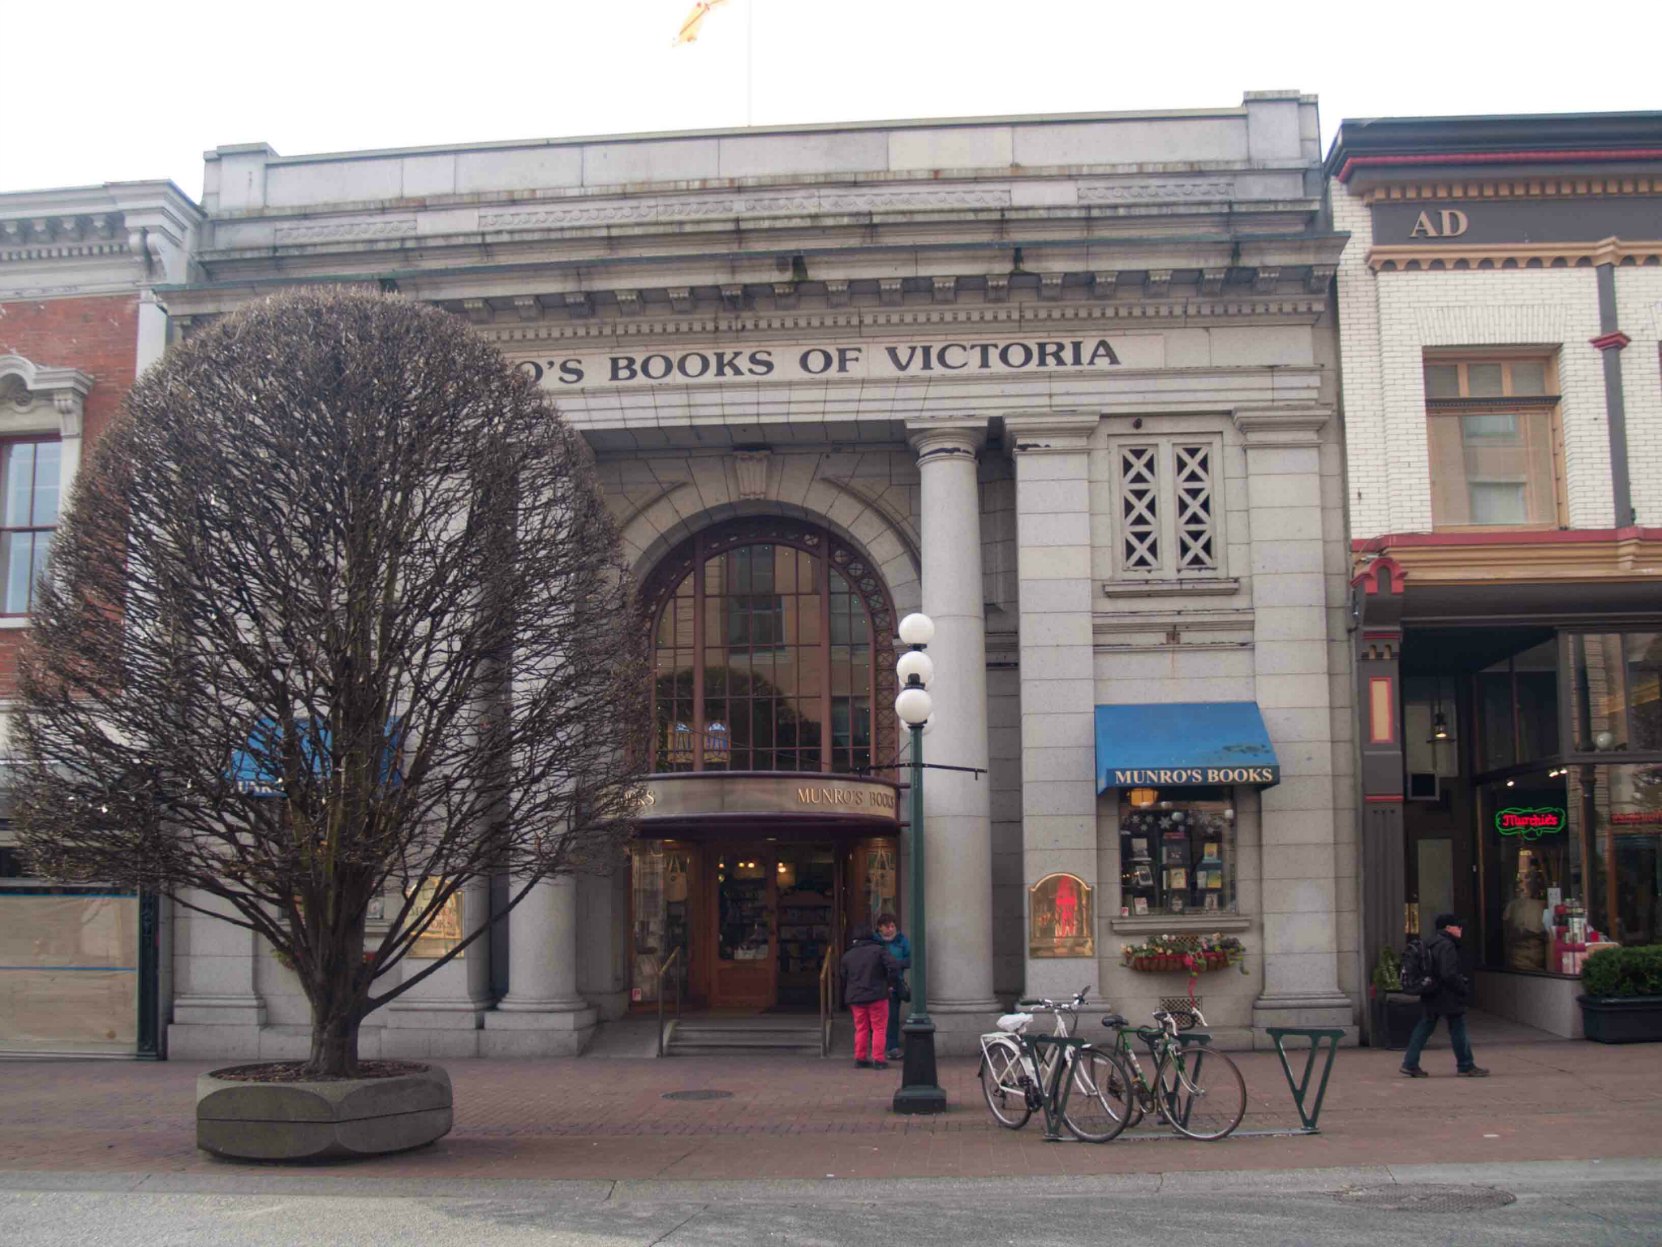 Munro's Books, 1108 Government Street (photo by Victoria Online Sightseeing Tours)